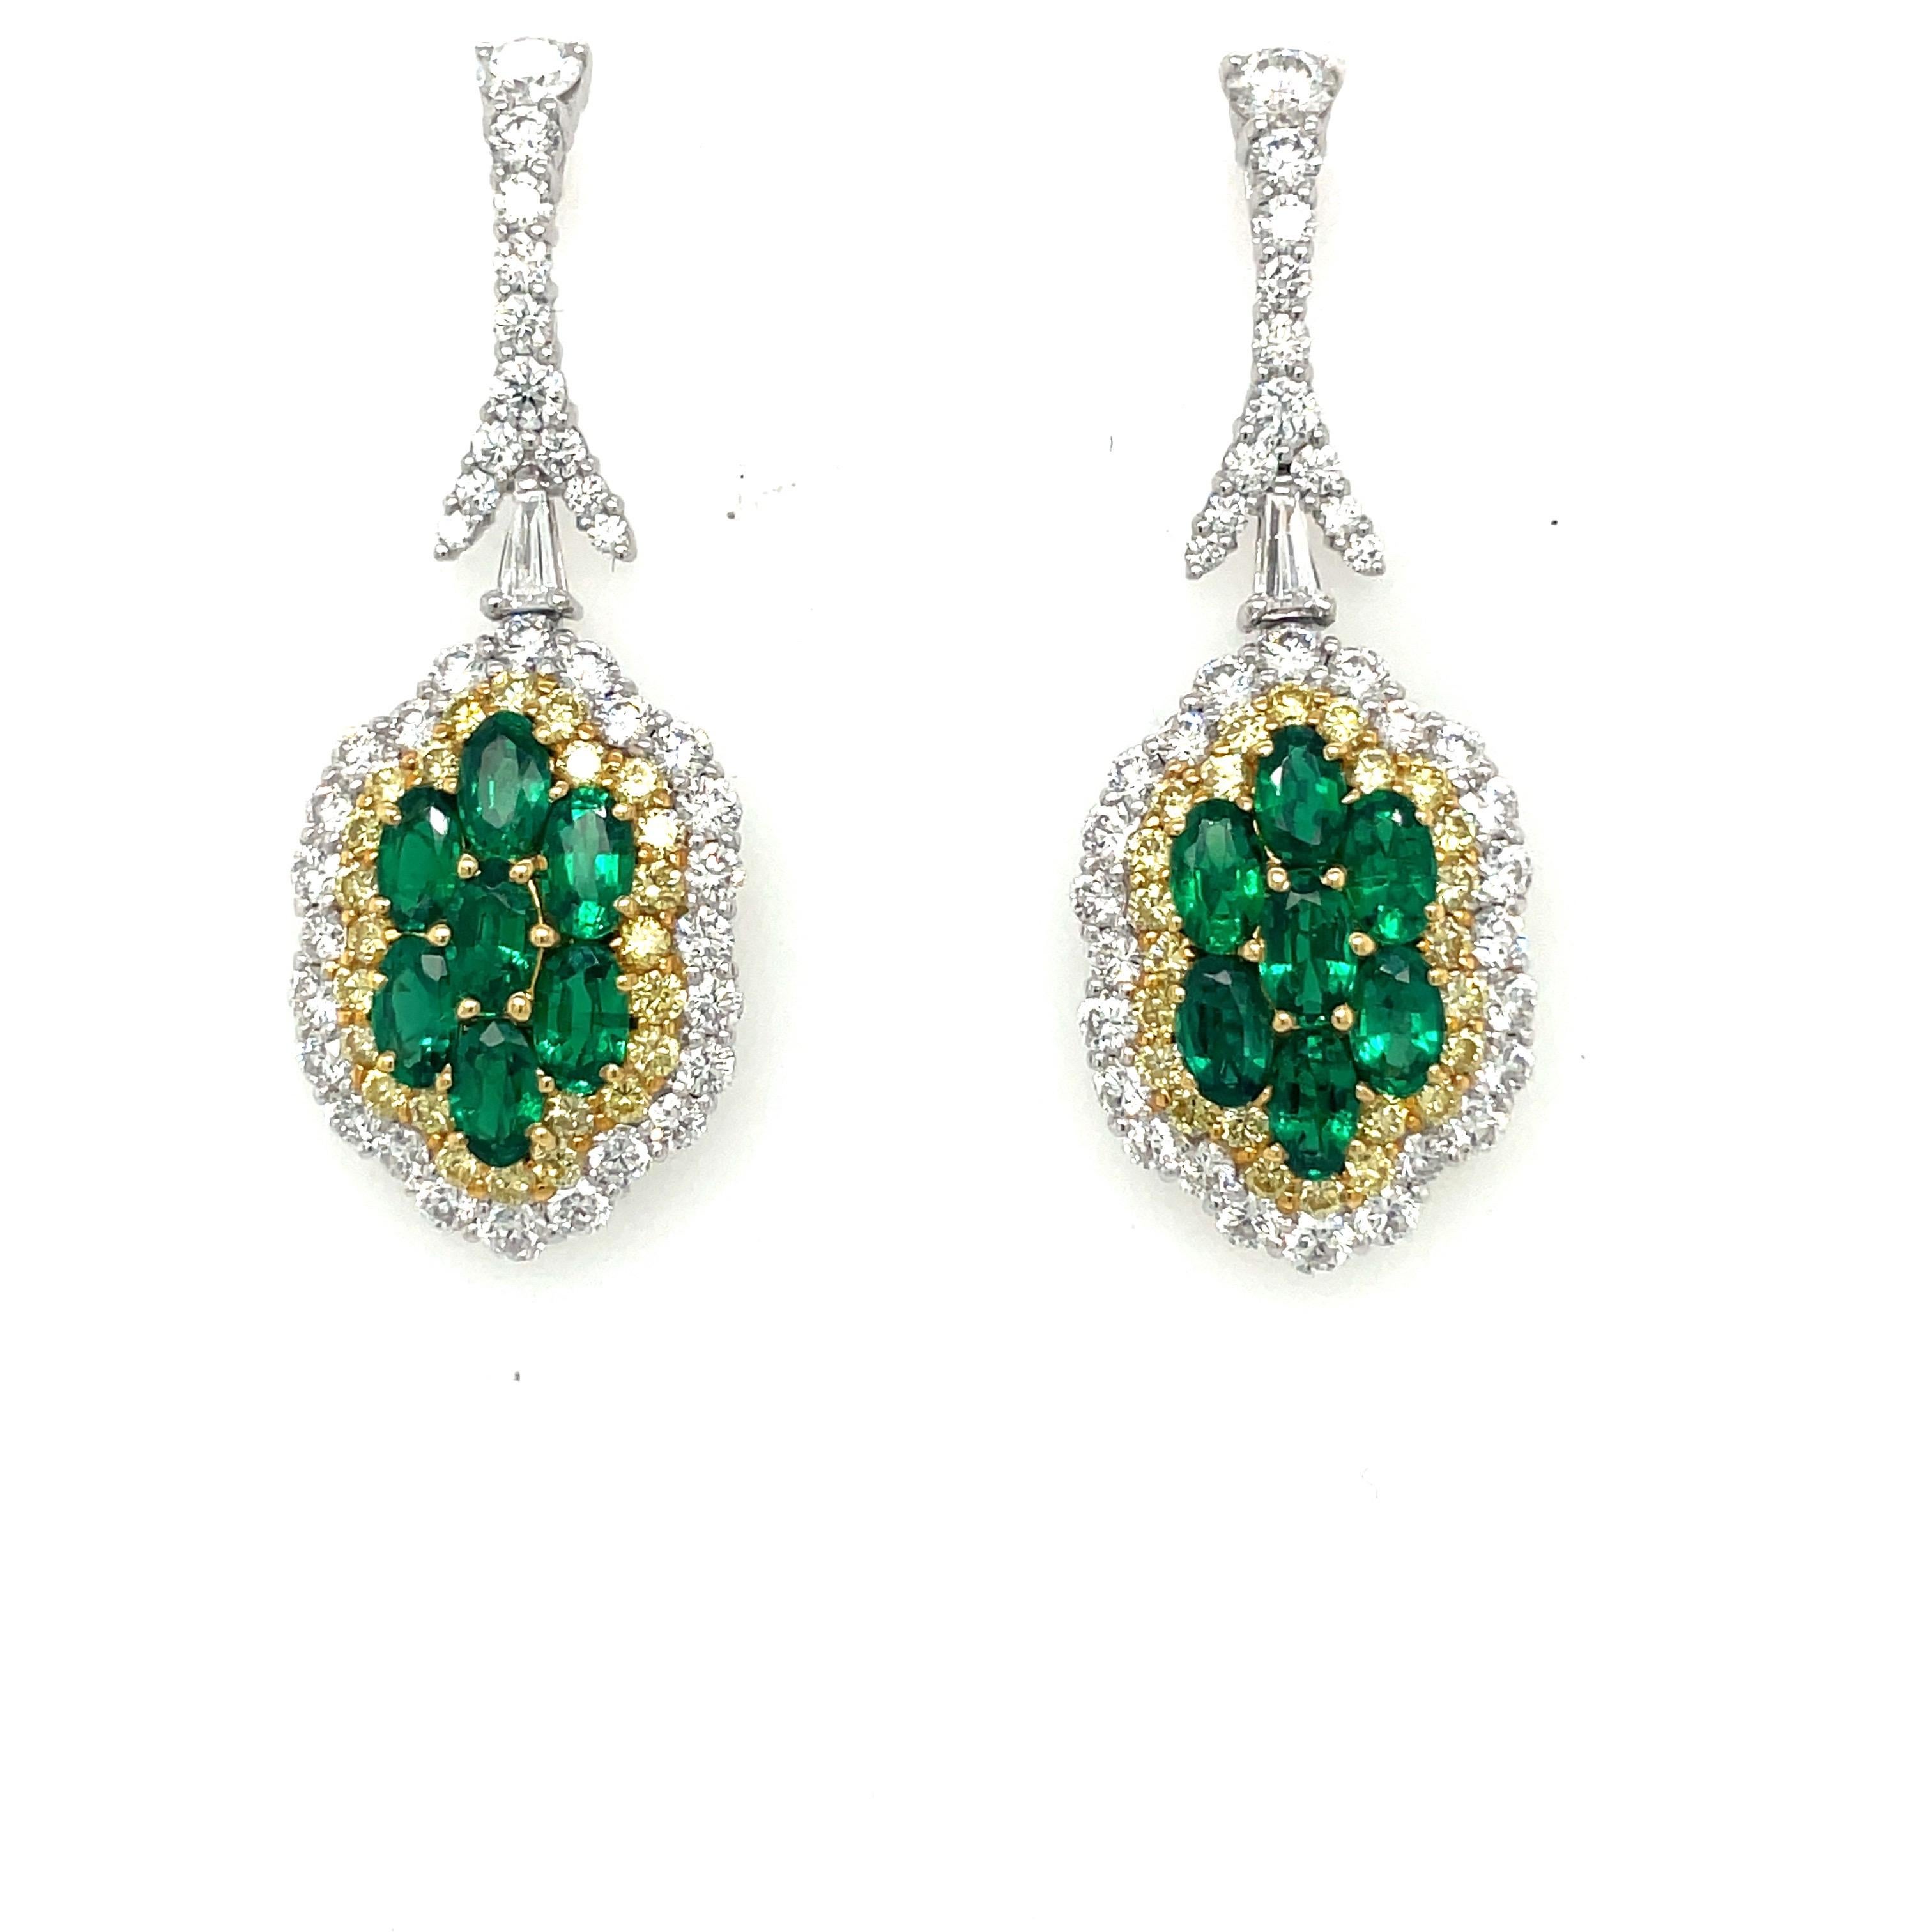 A magnificent pair of emerald and diamond hanging earrings. The platinum and 18 karat yellow gold earrings are set with a total of 14 oval emeralds. Natural yellow and white round diamonds surround the emeralds in a soft scalloped shape. The post